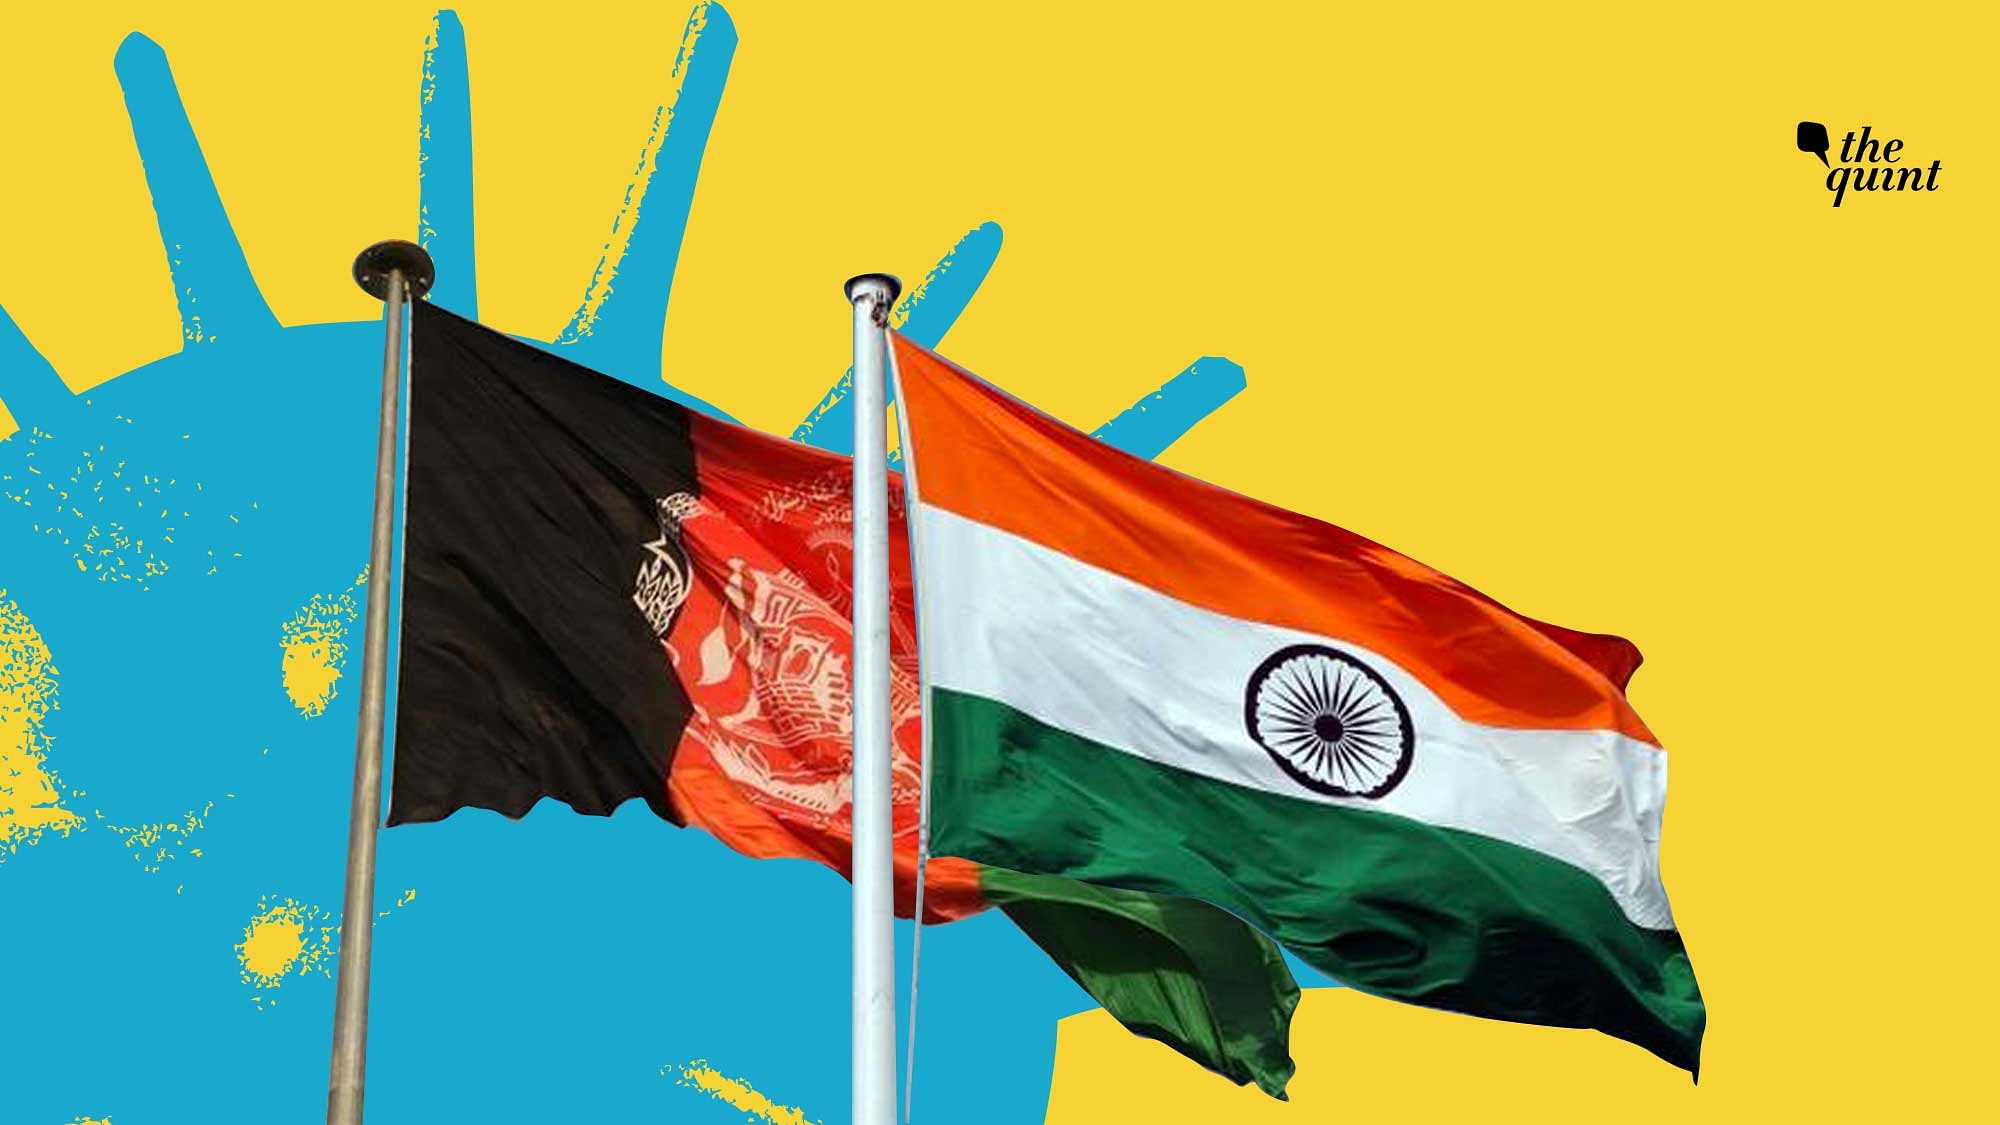 Image of India’s and Afghanistan’s flags used for representational purposes.